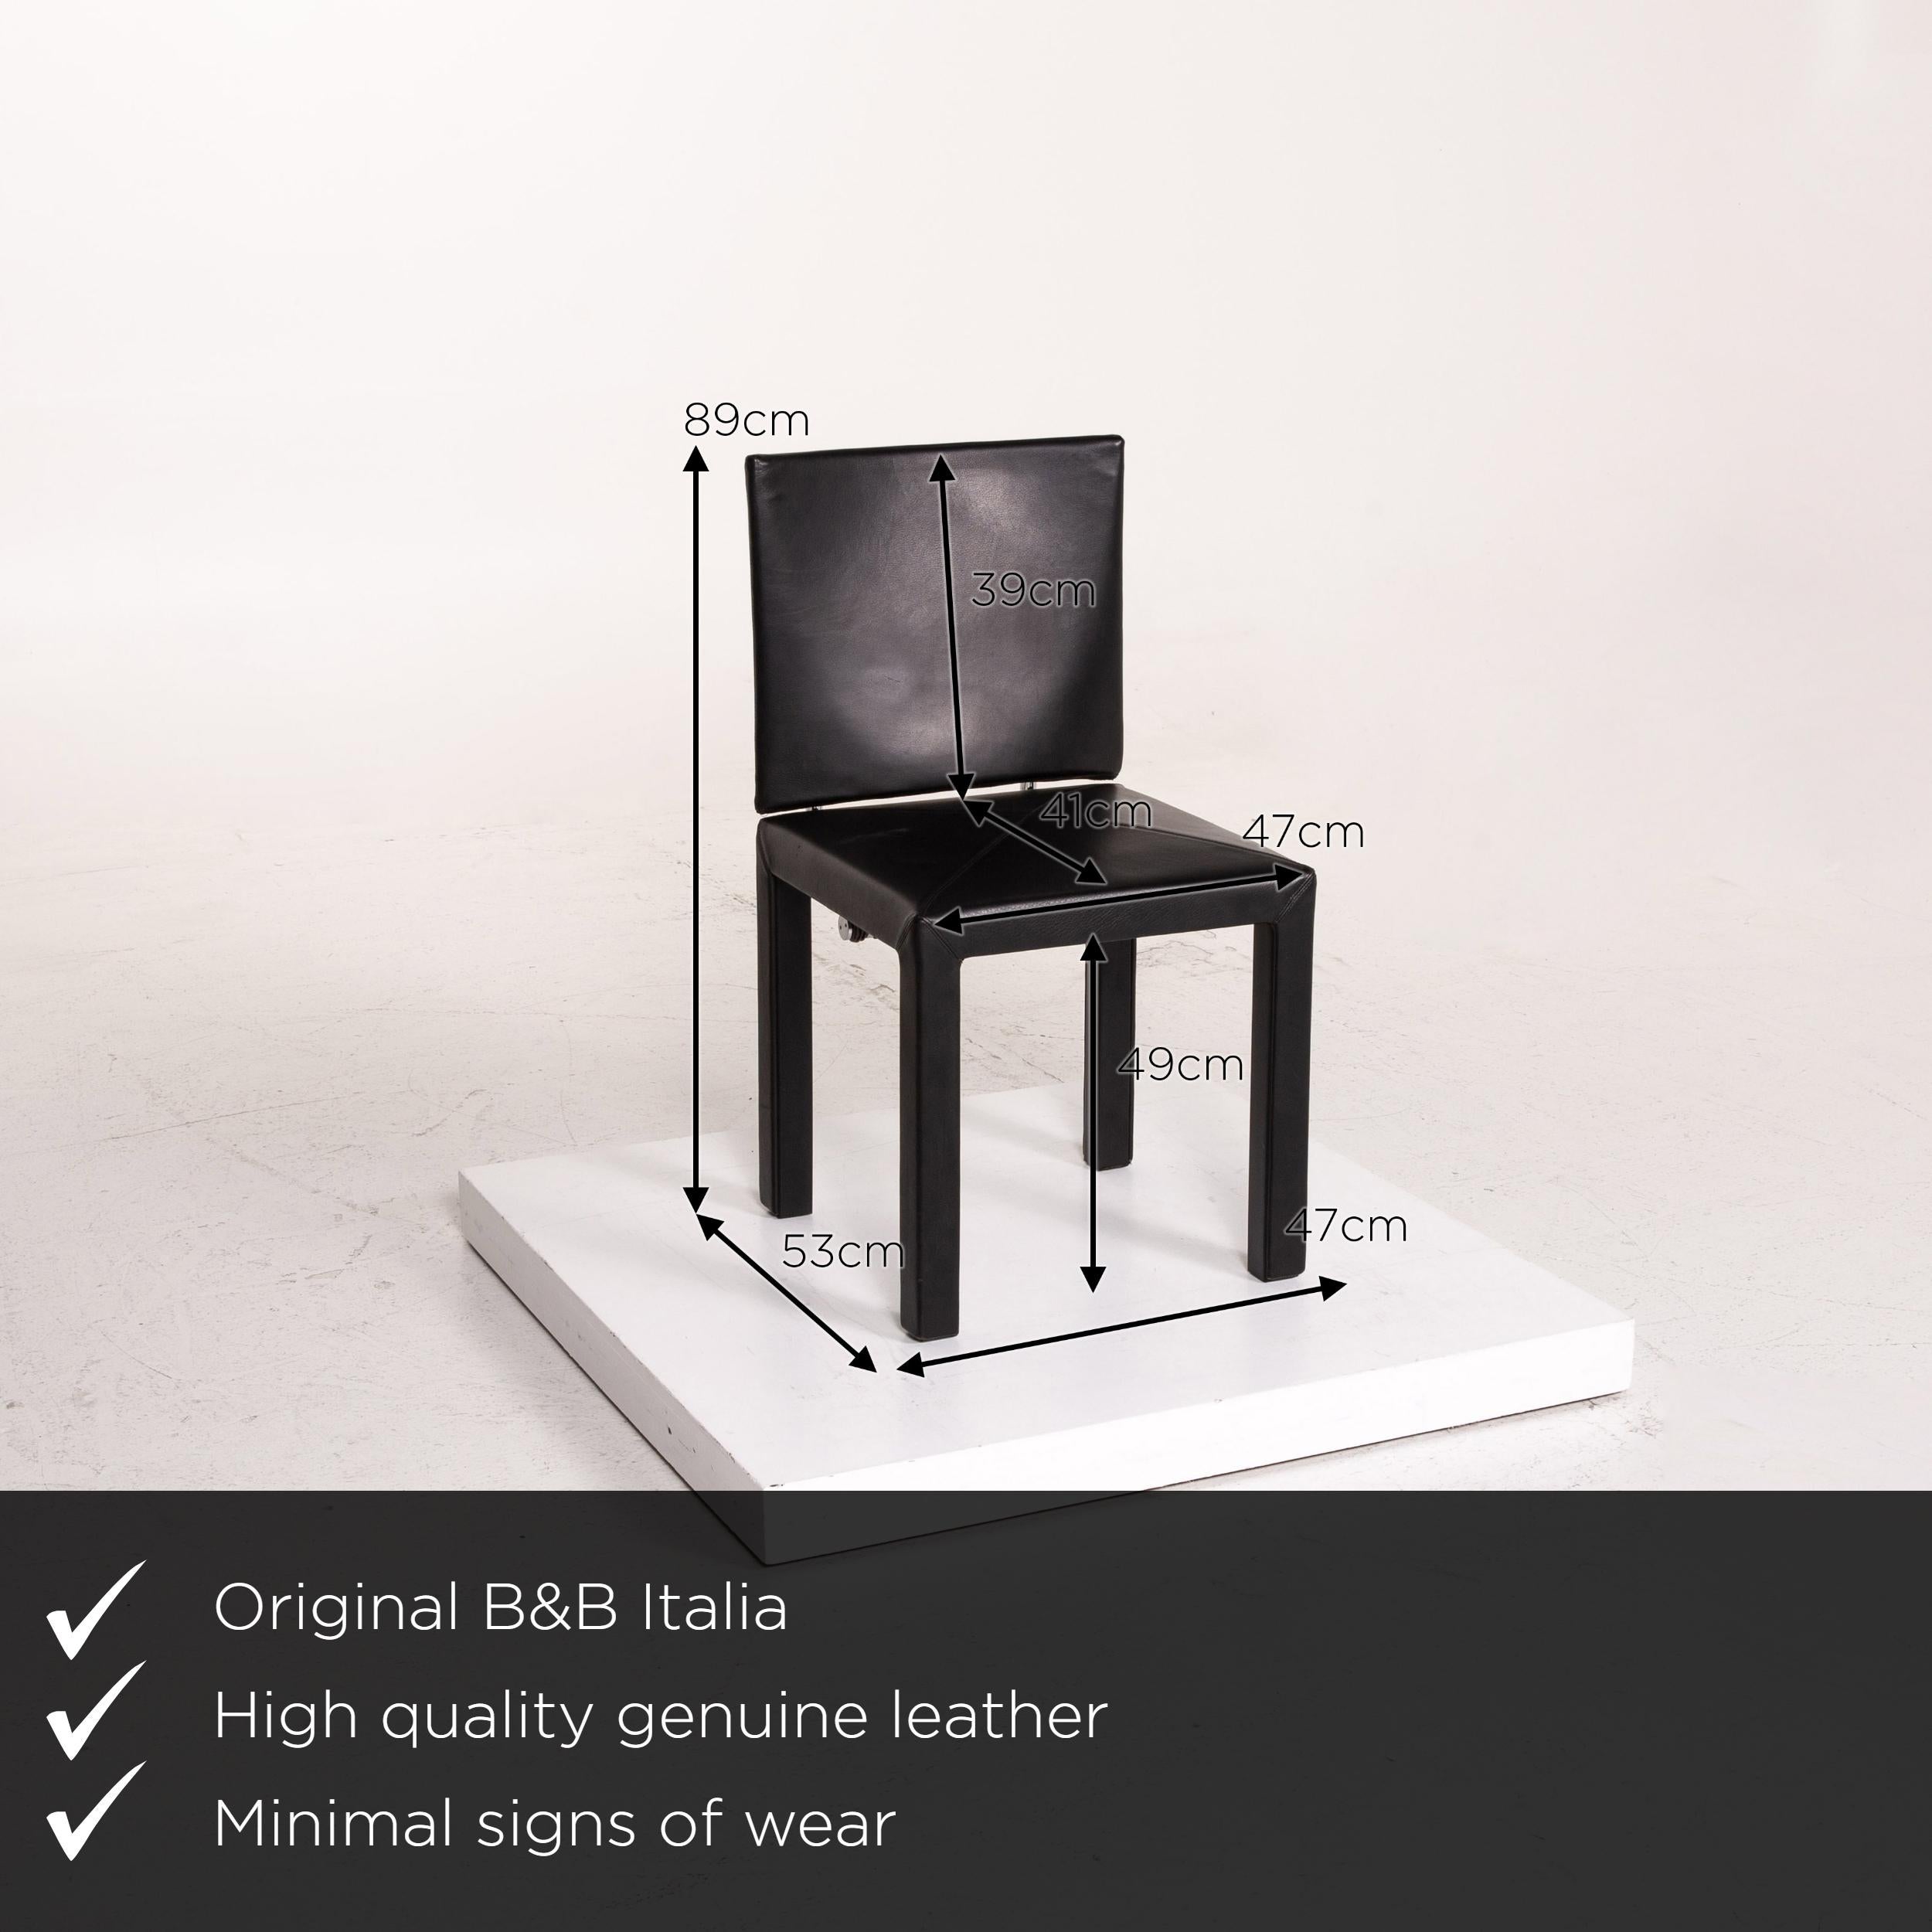 We present to you a B&B Italia leather chair black.


 Product measurements in centimeters:
 

Depth 53
Width 47
Height 89
Seat height 49
Rest height
Seat depth 41
Seat width 47
Back height 39.
 